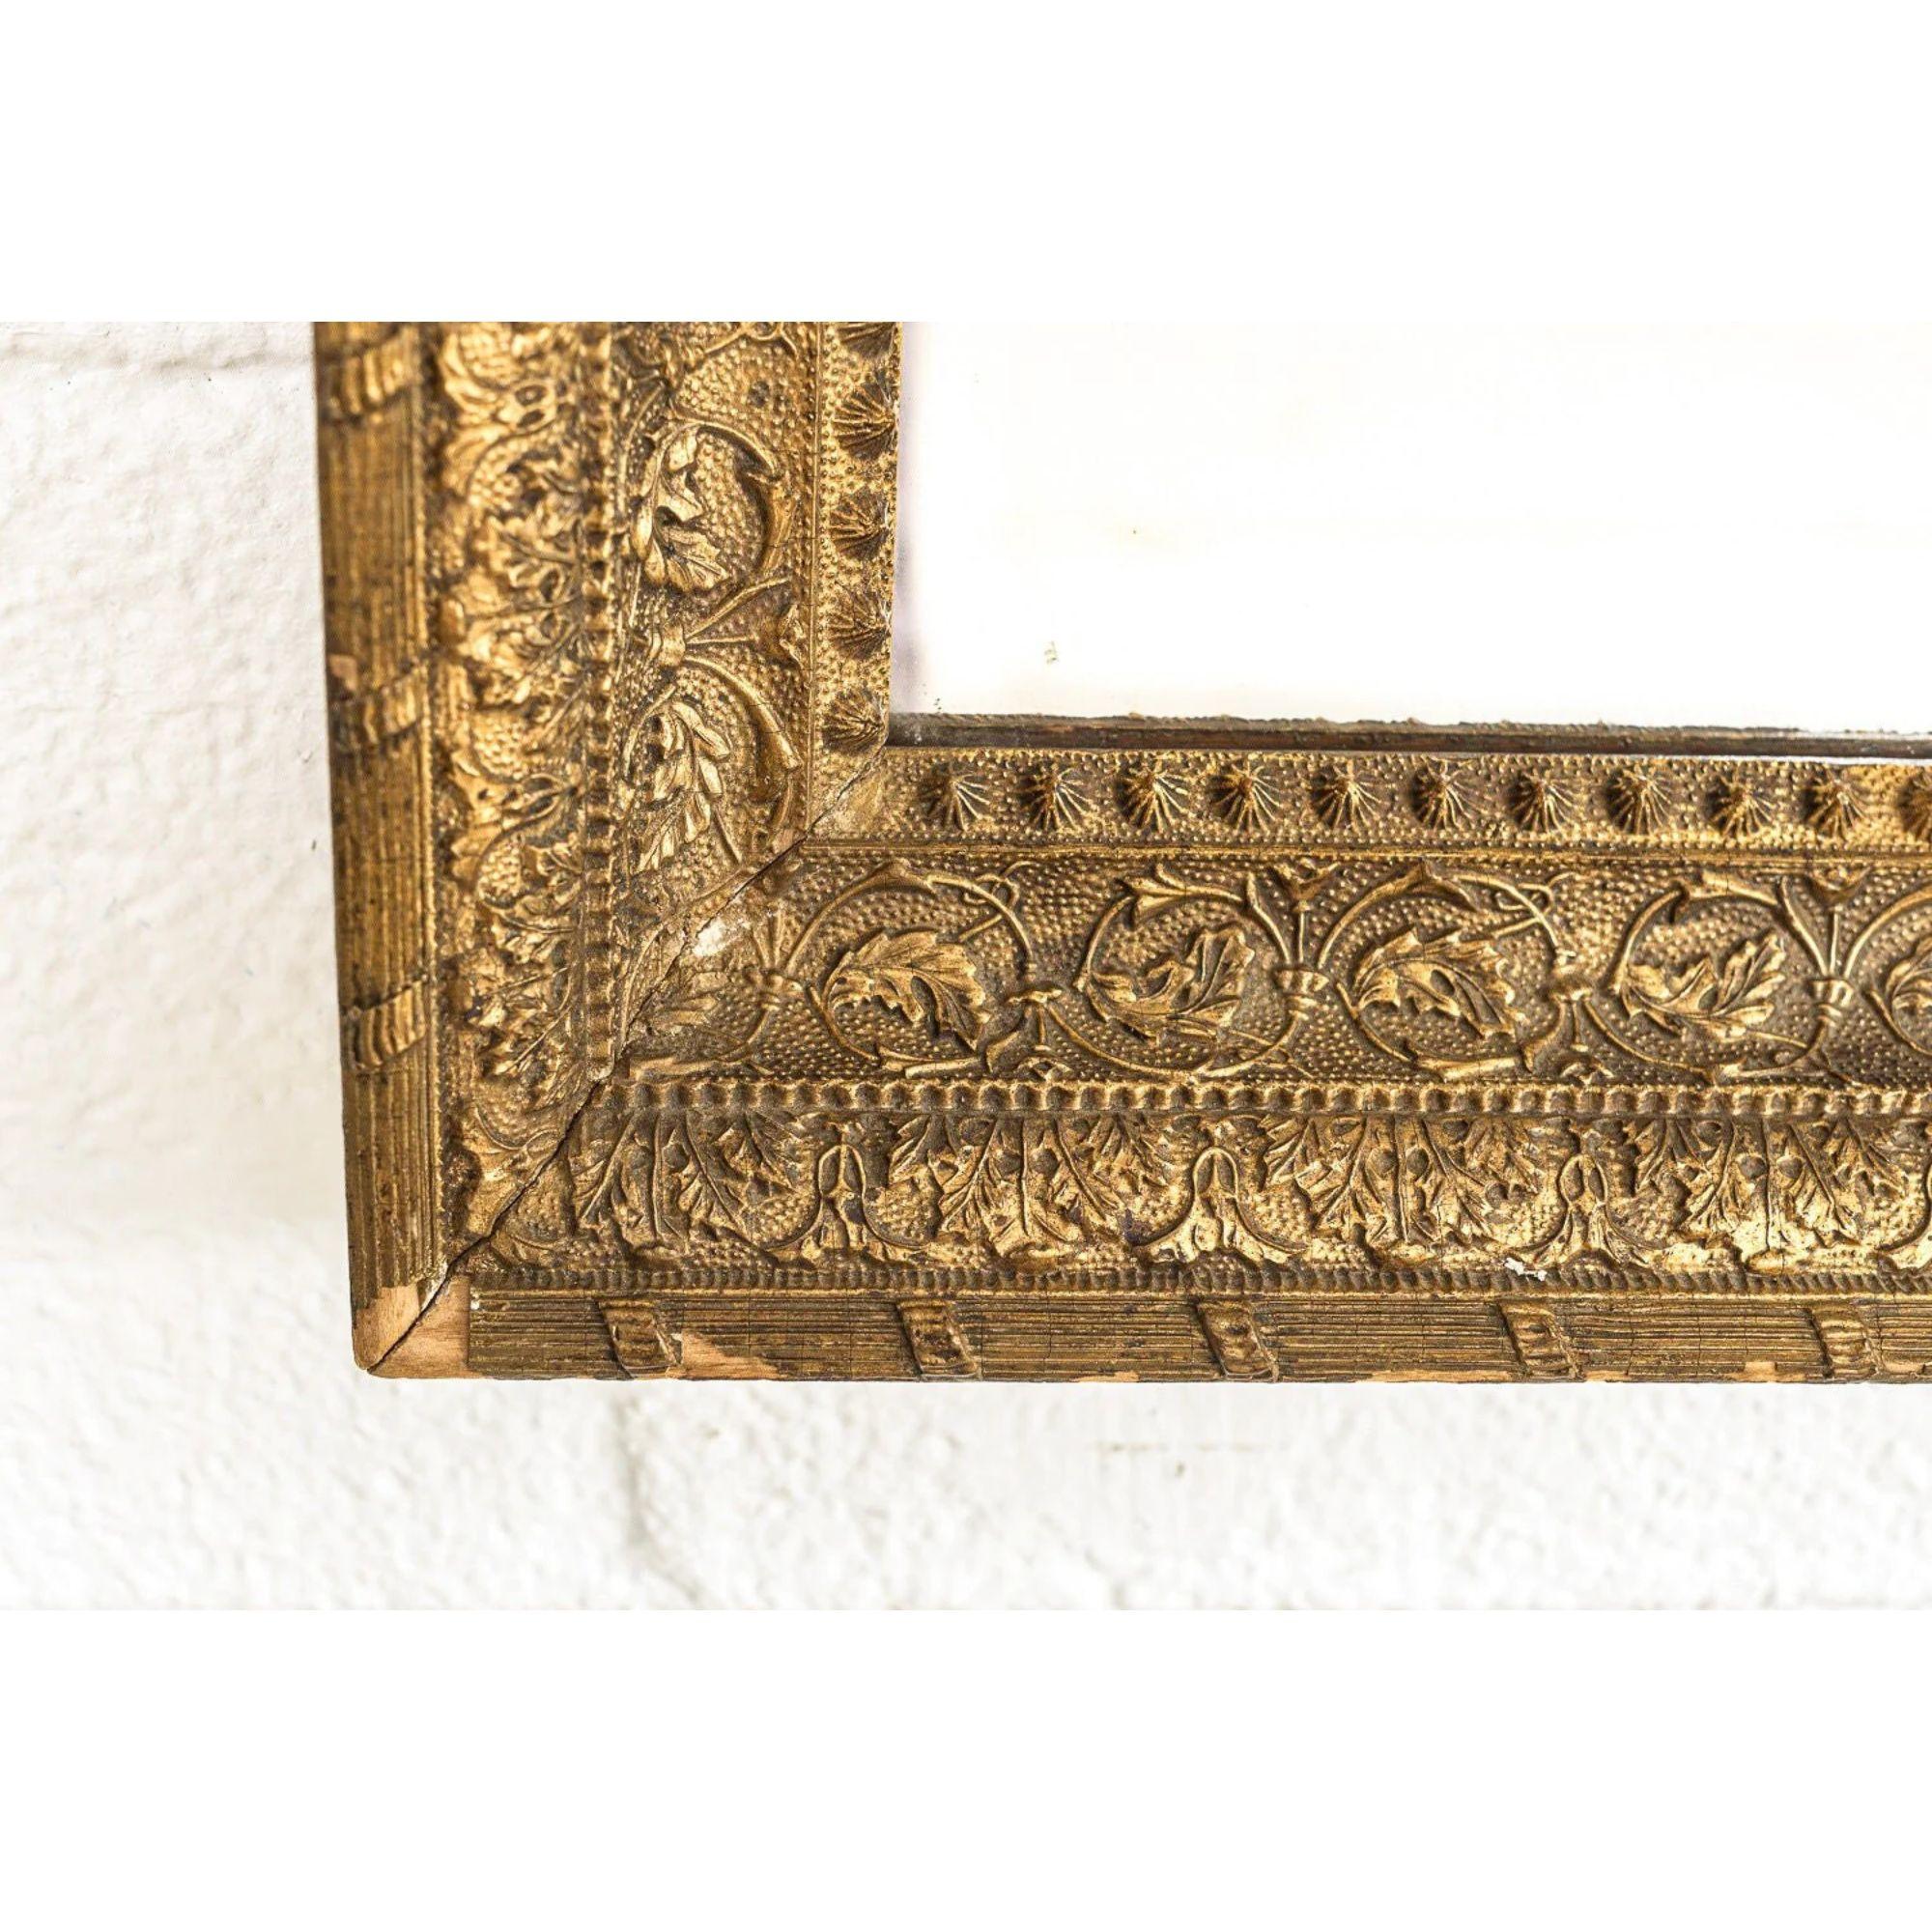 20th Century Vintage Antique Ornate Gold Decorative Hanging Wall Mirror For Sale